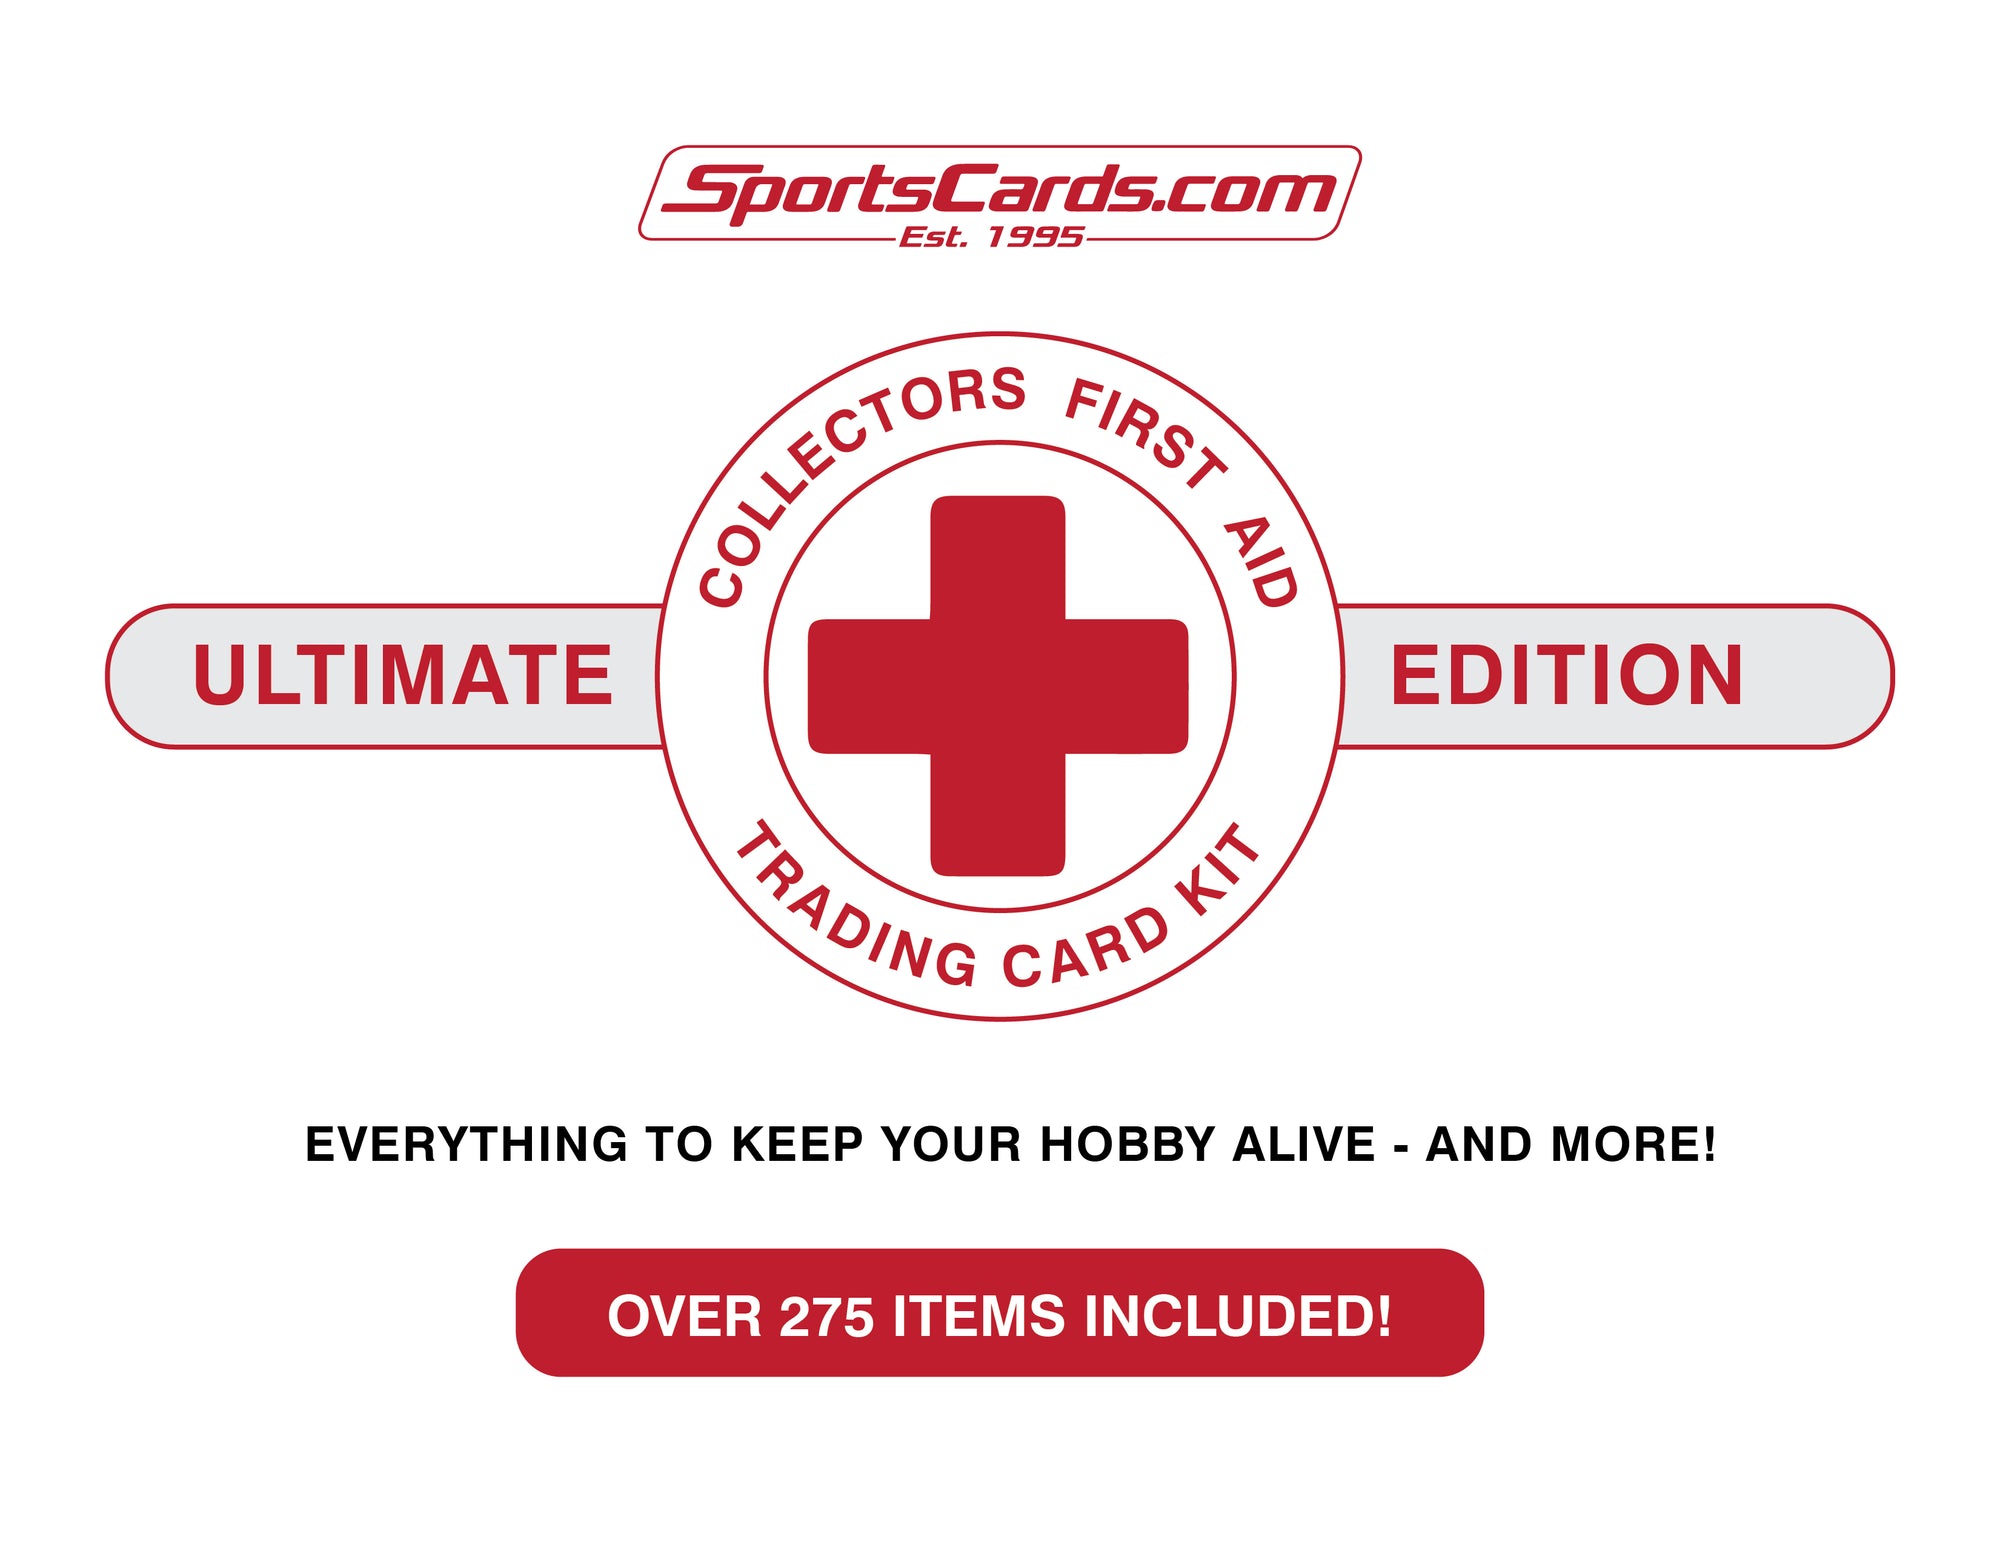 ULTIMATE COLLECTOR'S AID KIT *275 ITEMS* EVERYTHING YOU NEED TO KEEP YOUR HOBBY ALIVE!